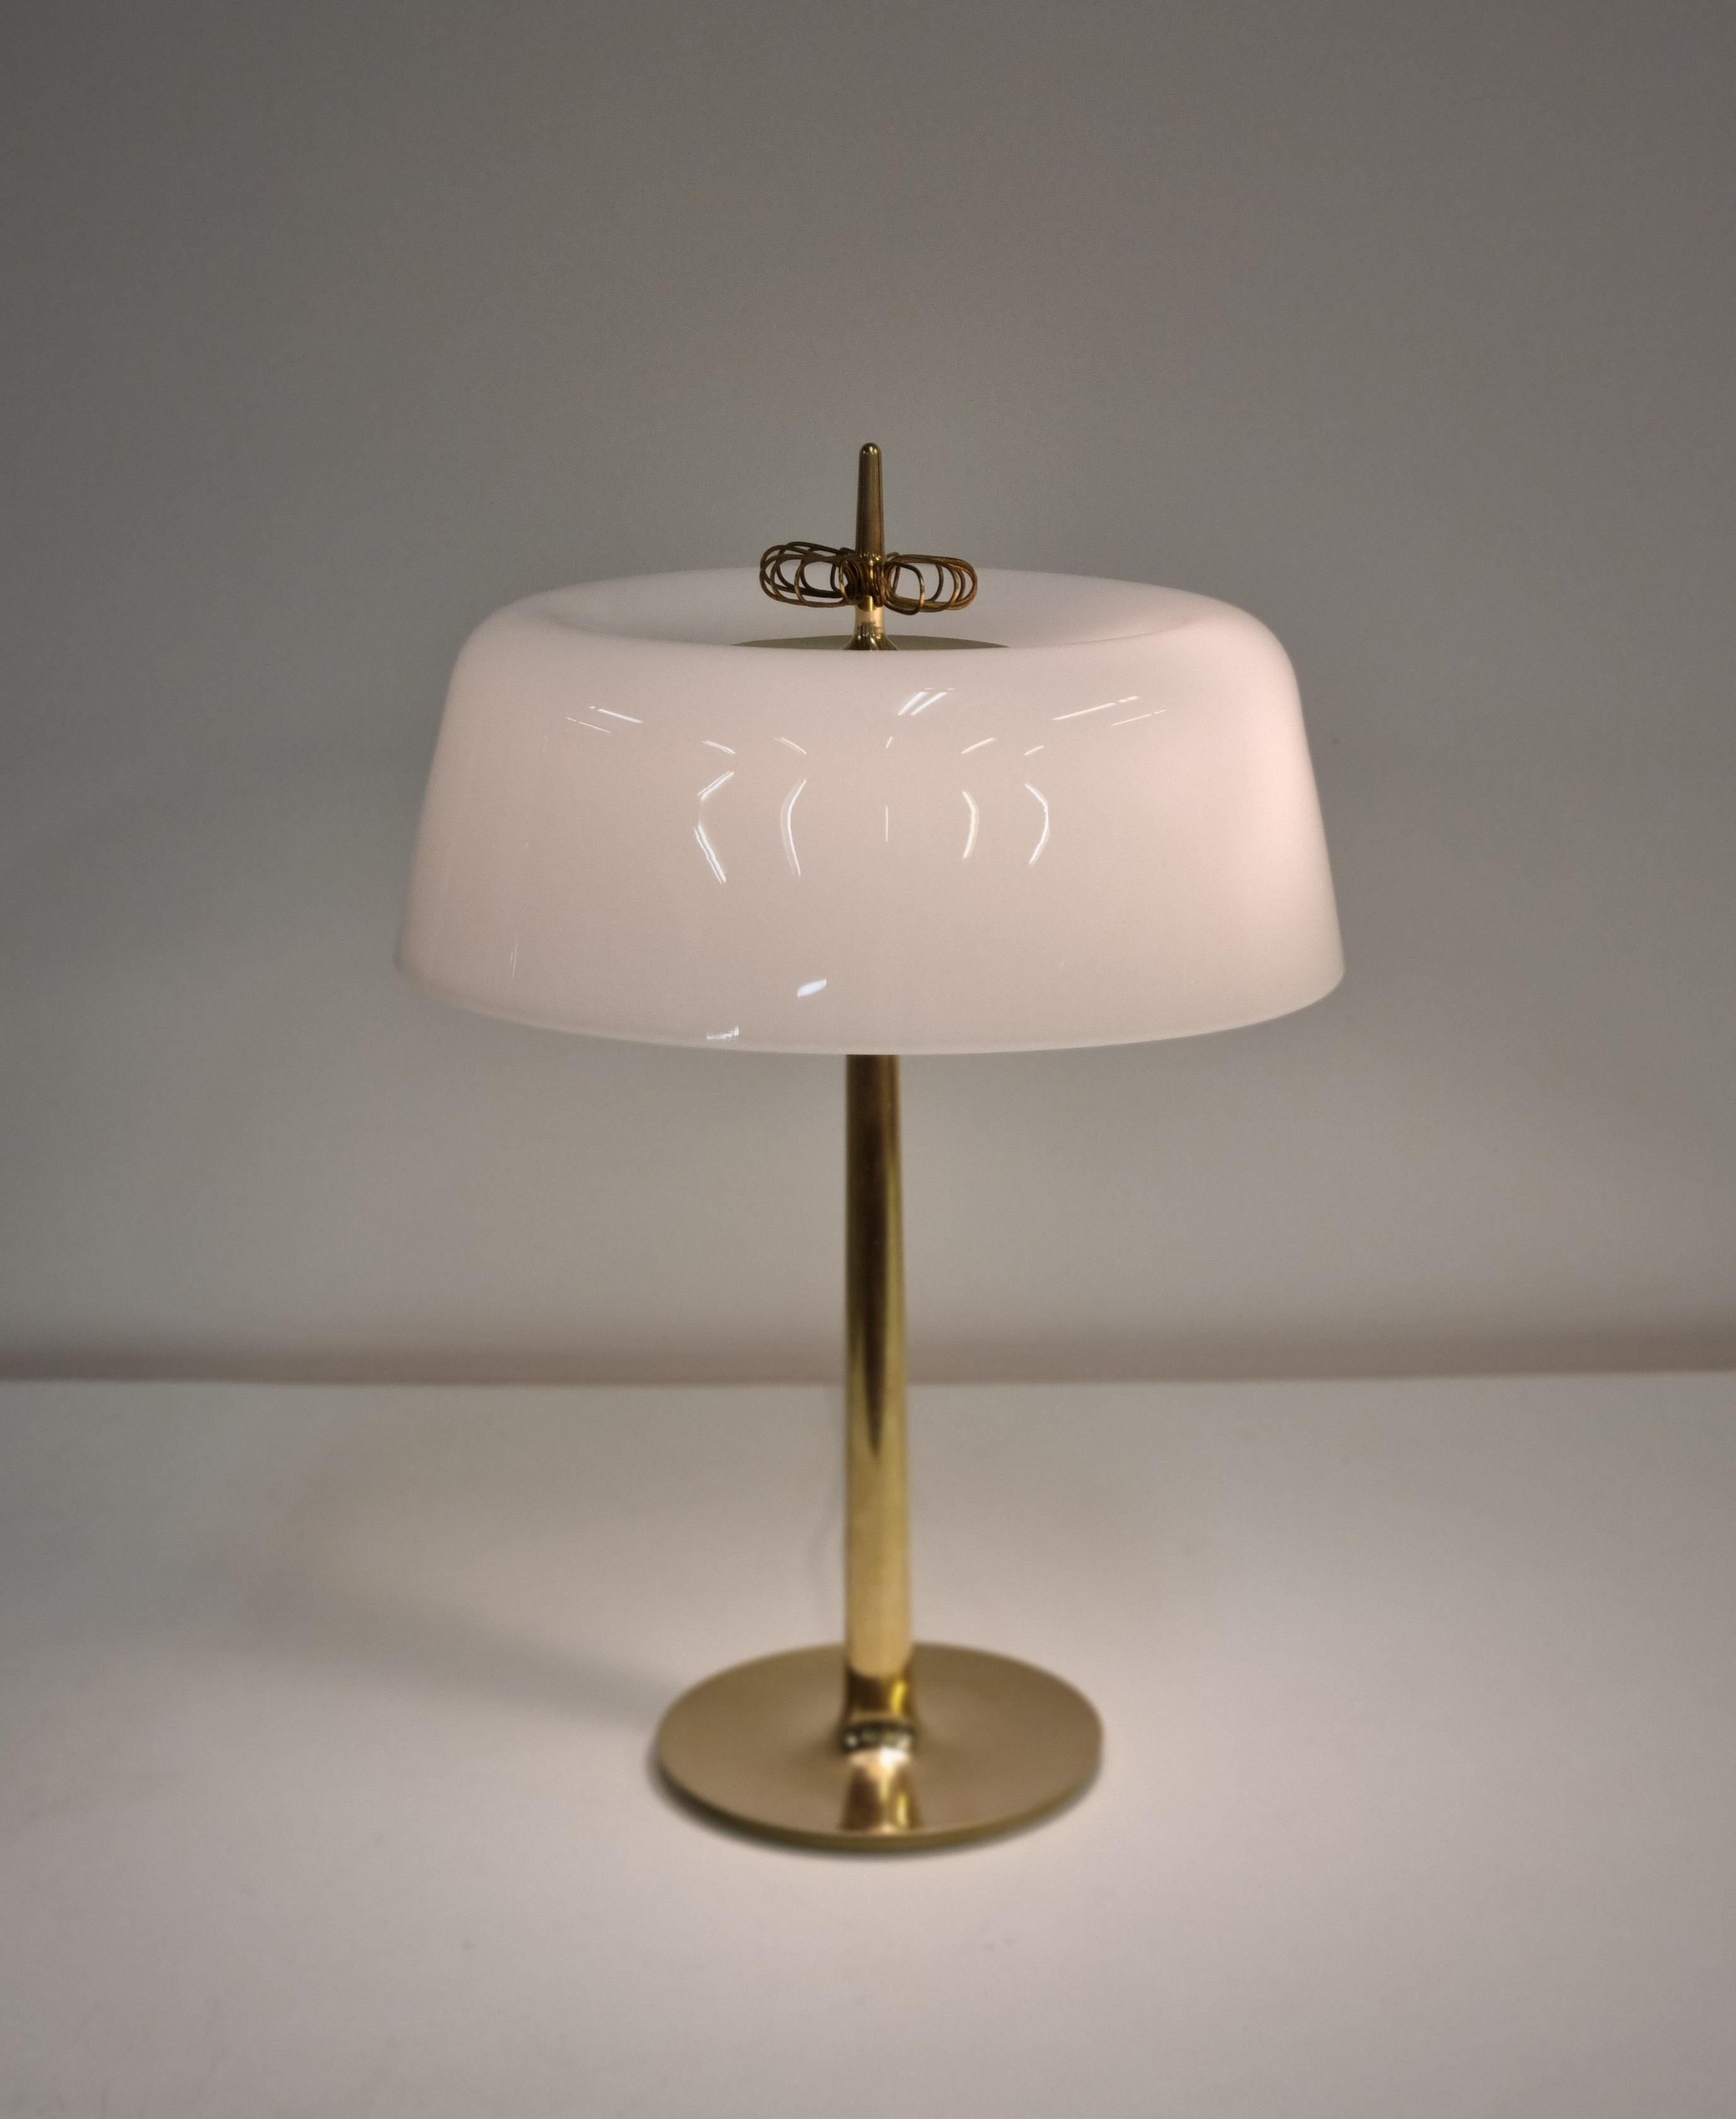 This is a really elegant, rare desk lamp model 9211 by Paavo Tynell (1890-1973)
from 1950s for Taito, Finland. It is in it's original condition. 
The lamp body is made with cast brass and has a sleek seamless shape covered with a white rounded opal